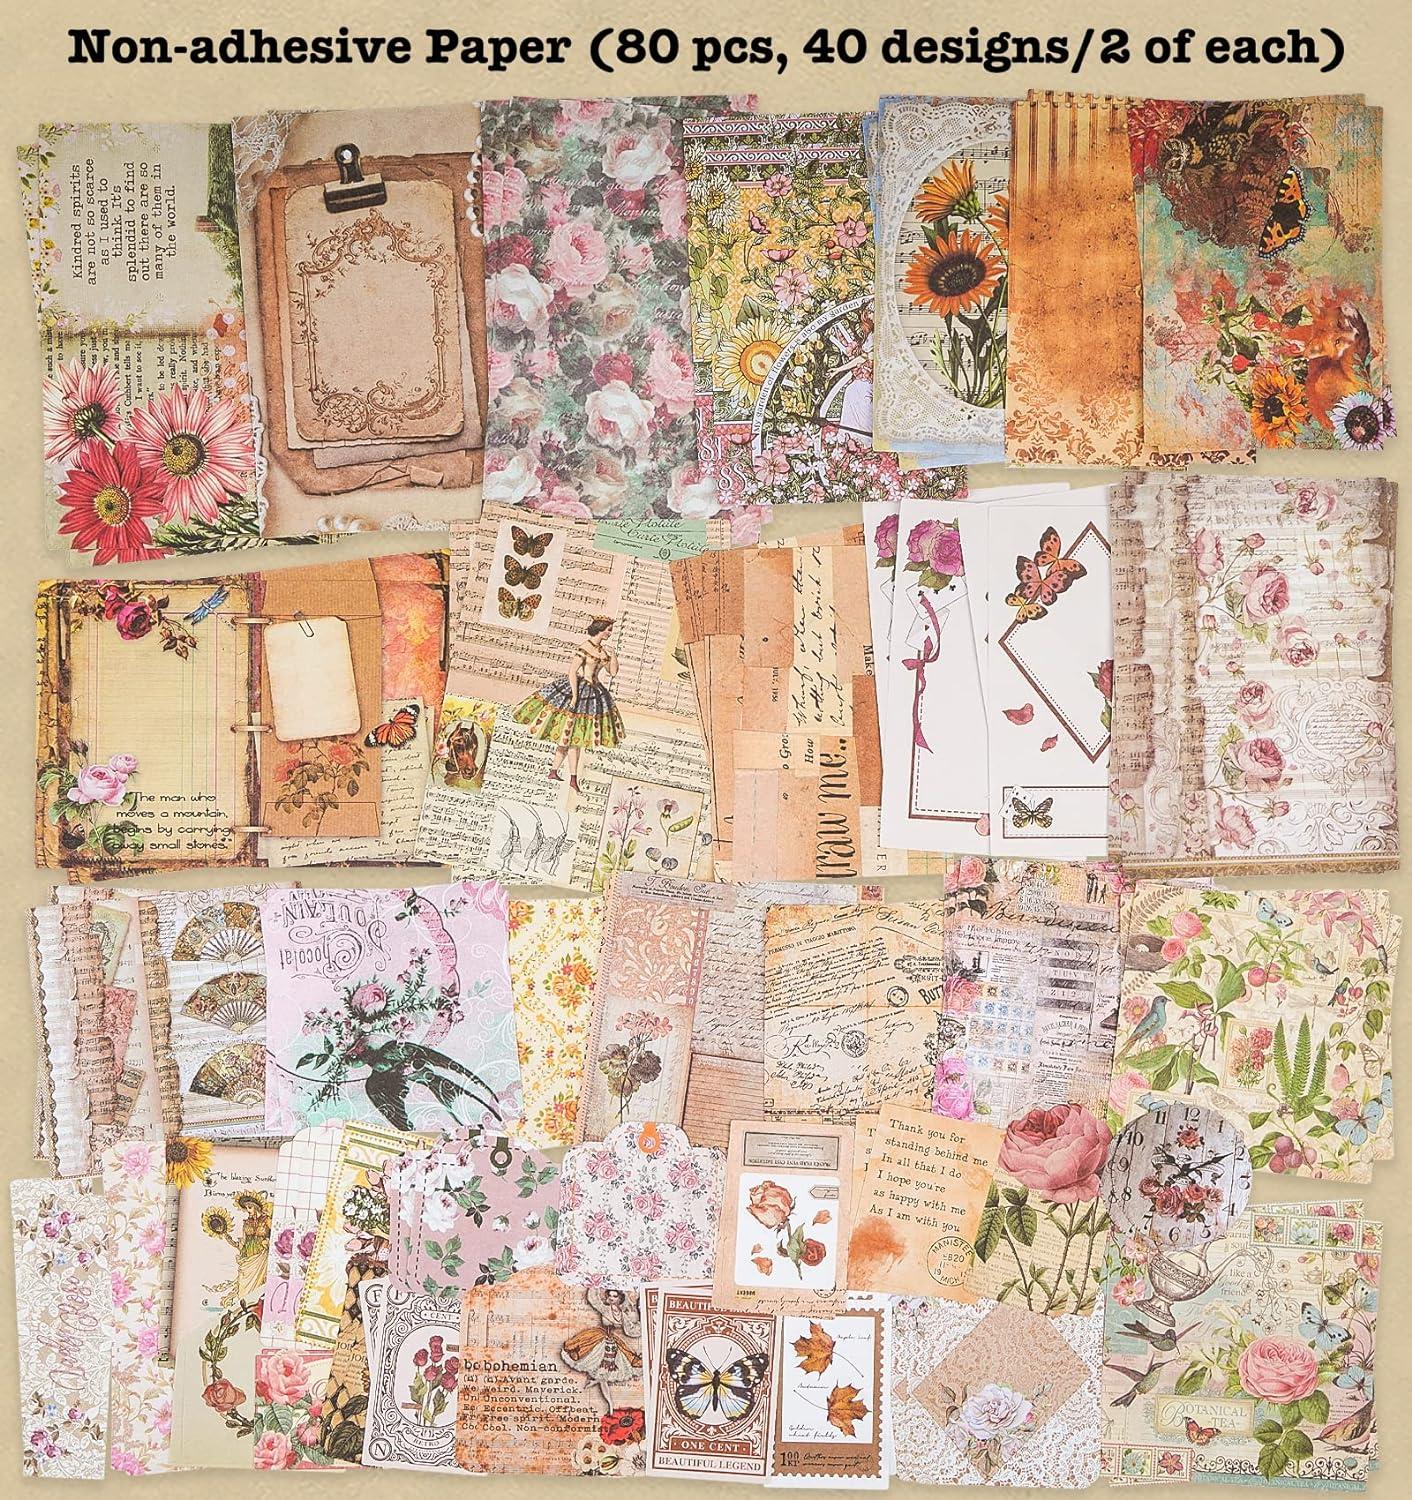 junk journal kit & Ephemera Bee Themed: Vintage Themed Collection One-Sided  Decorative Paper of Authentic Ephemera for Junk Journals, Scrapbooking